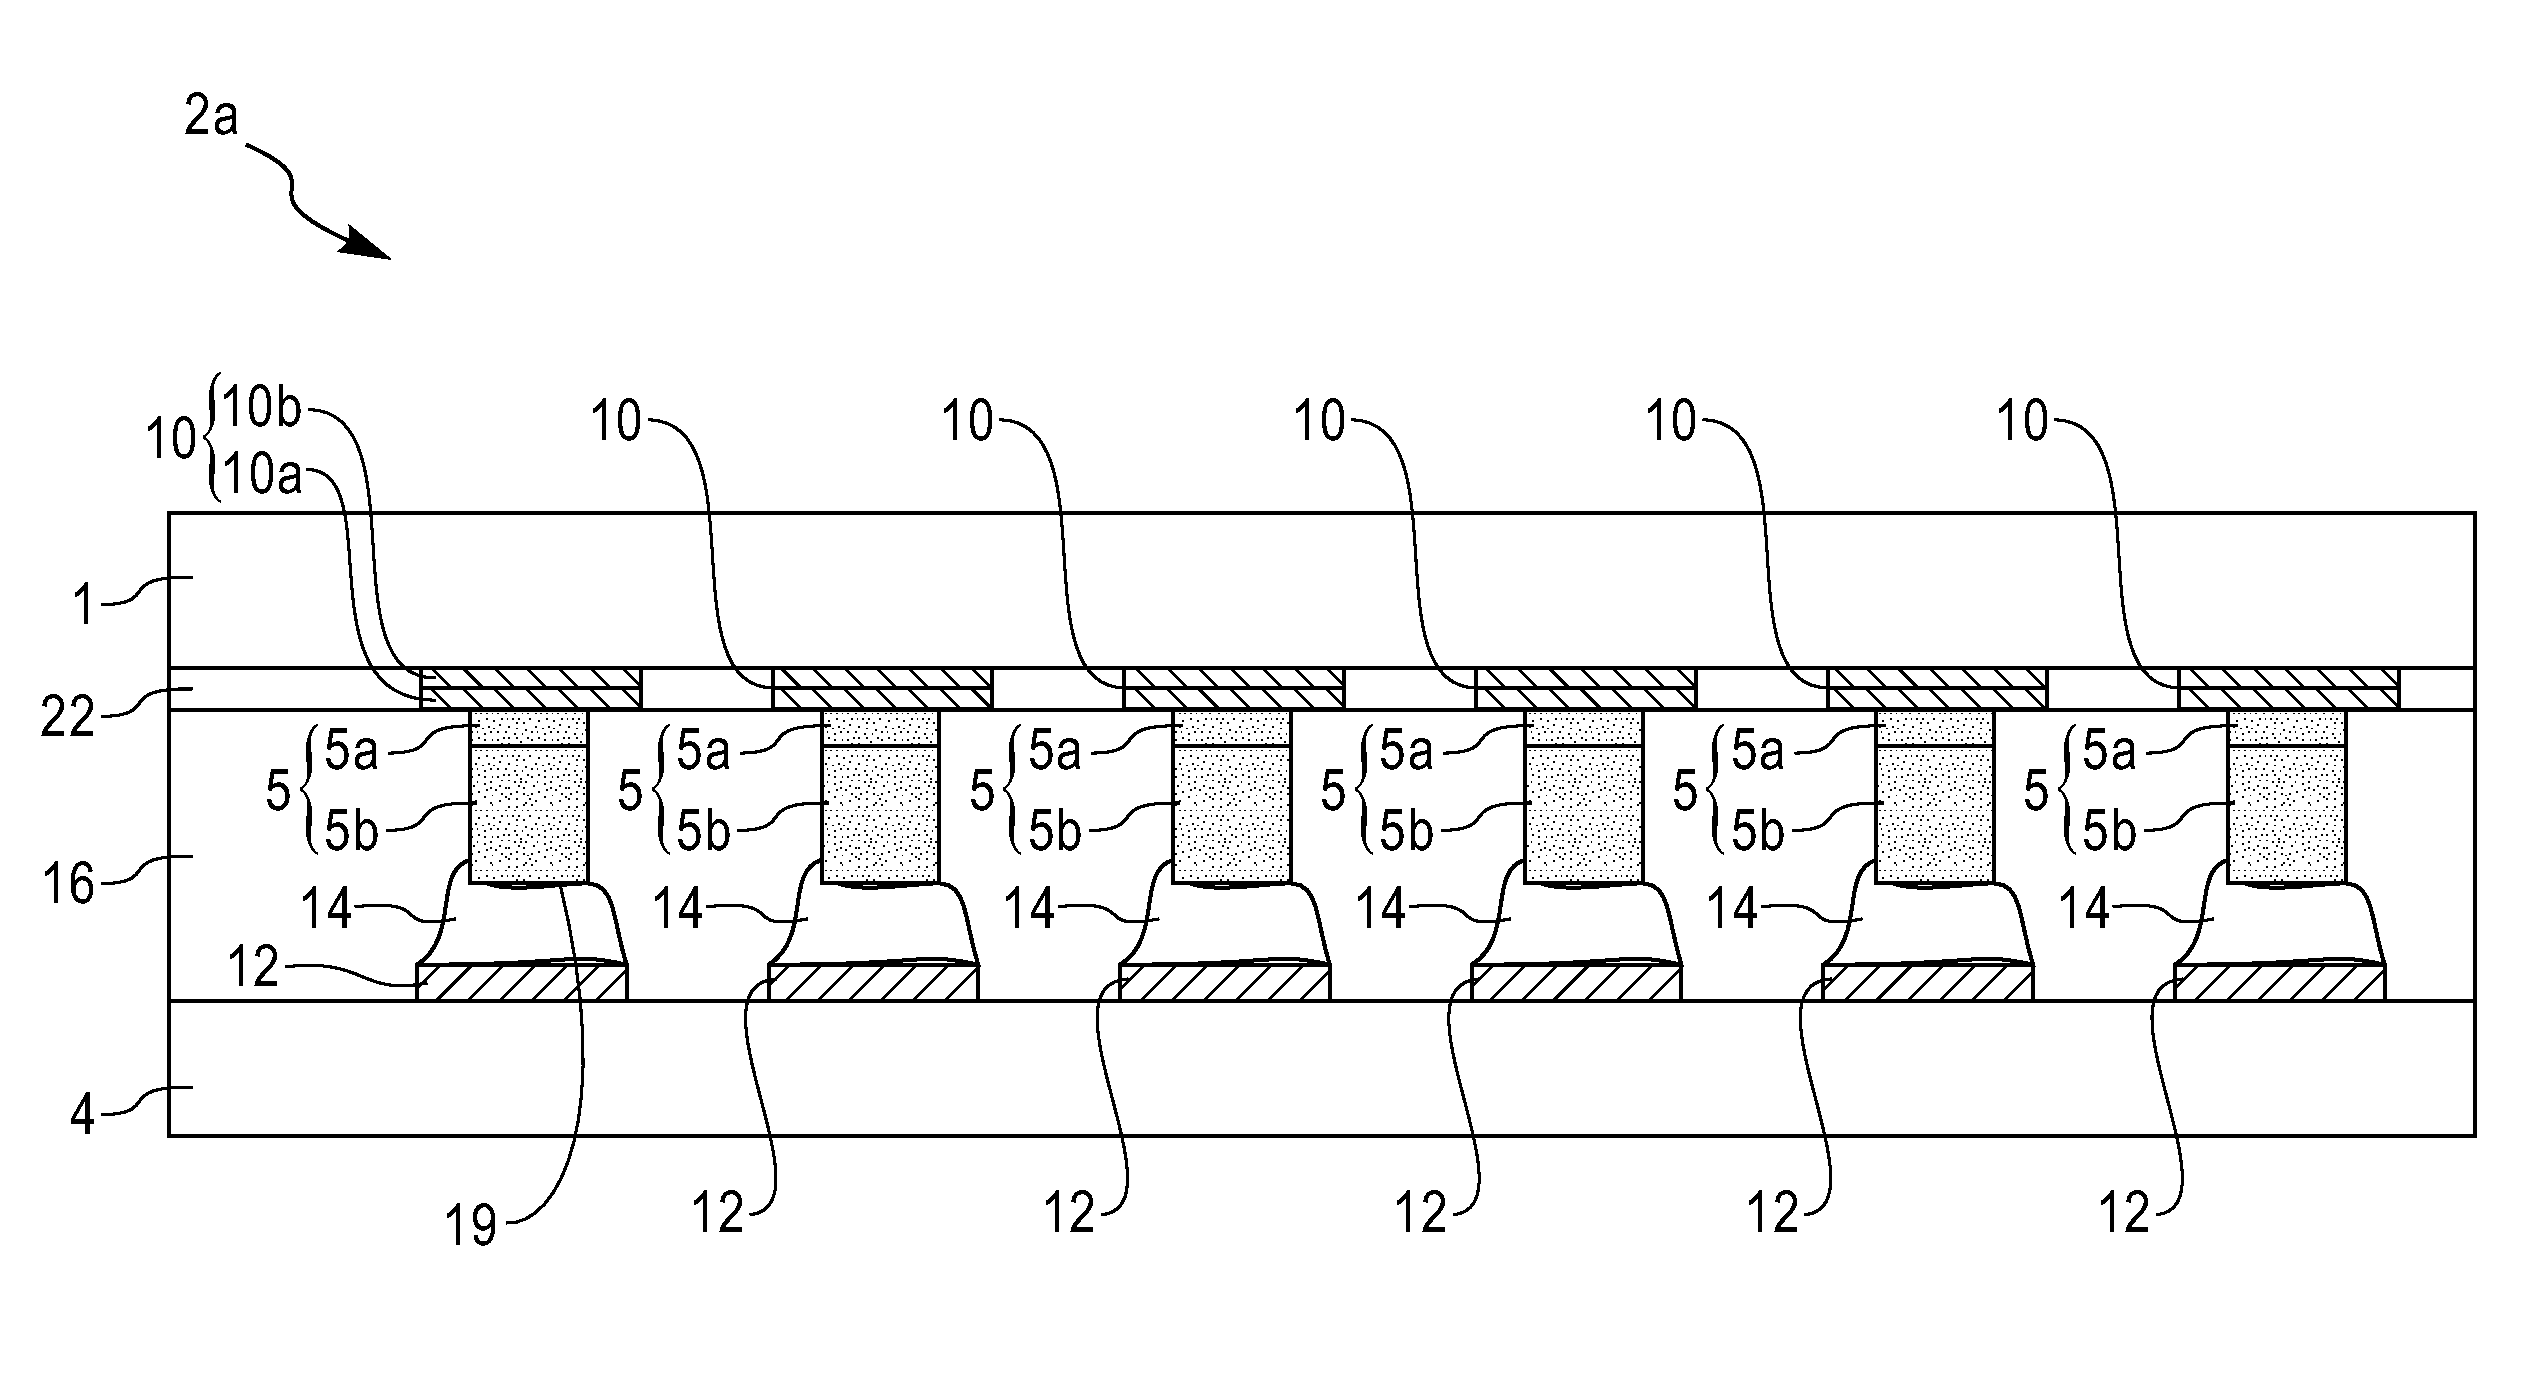 Thermo-compression bonded electrical interconnect structure and method